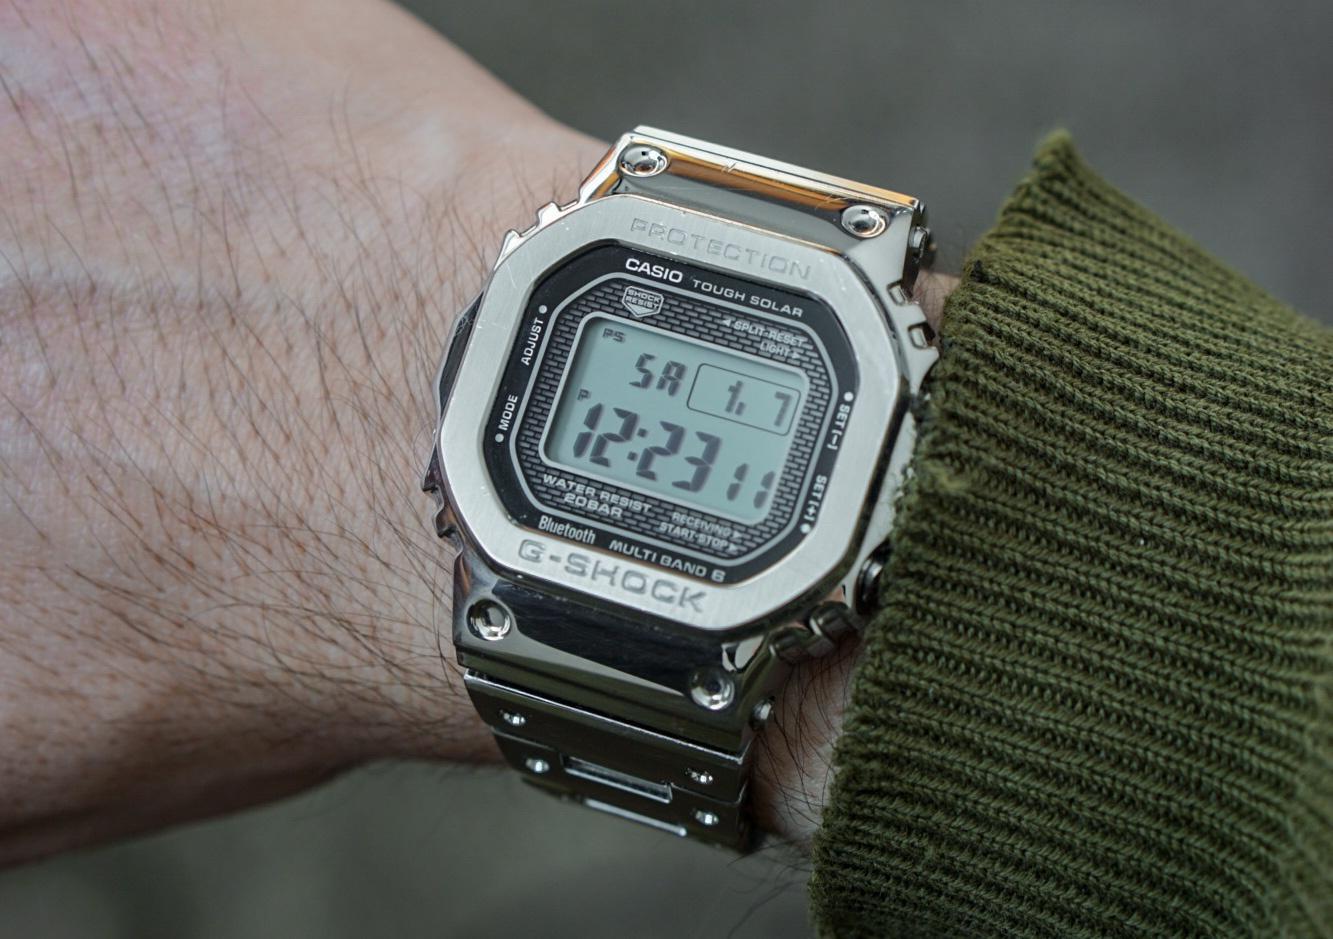 WTS] G-Shock GMWB5000D-1 full kit w/ extras — Modified for small